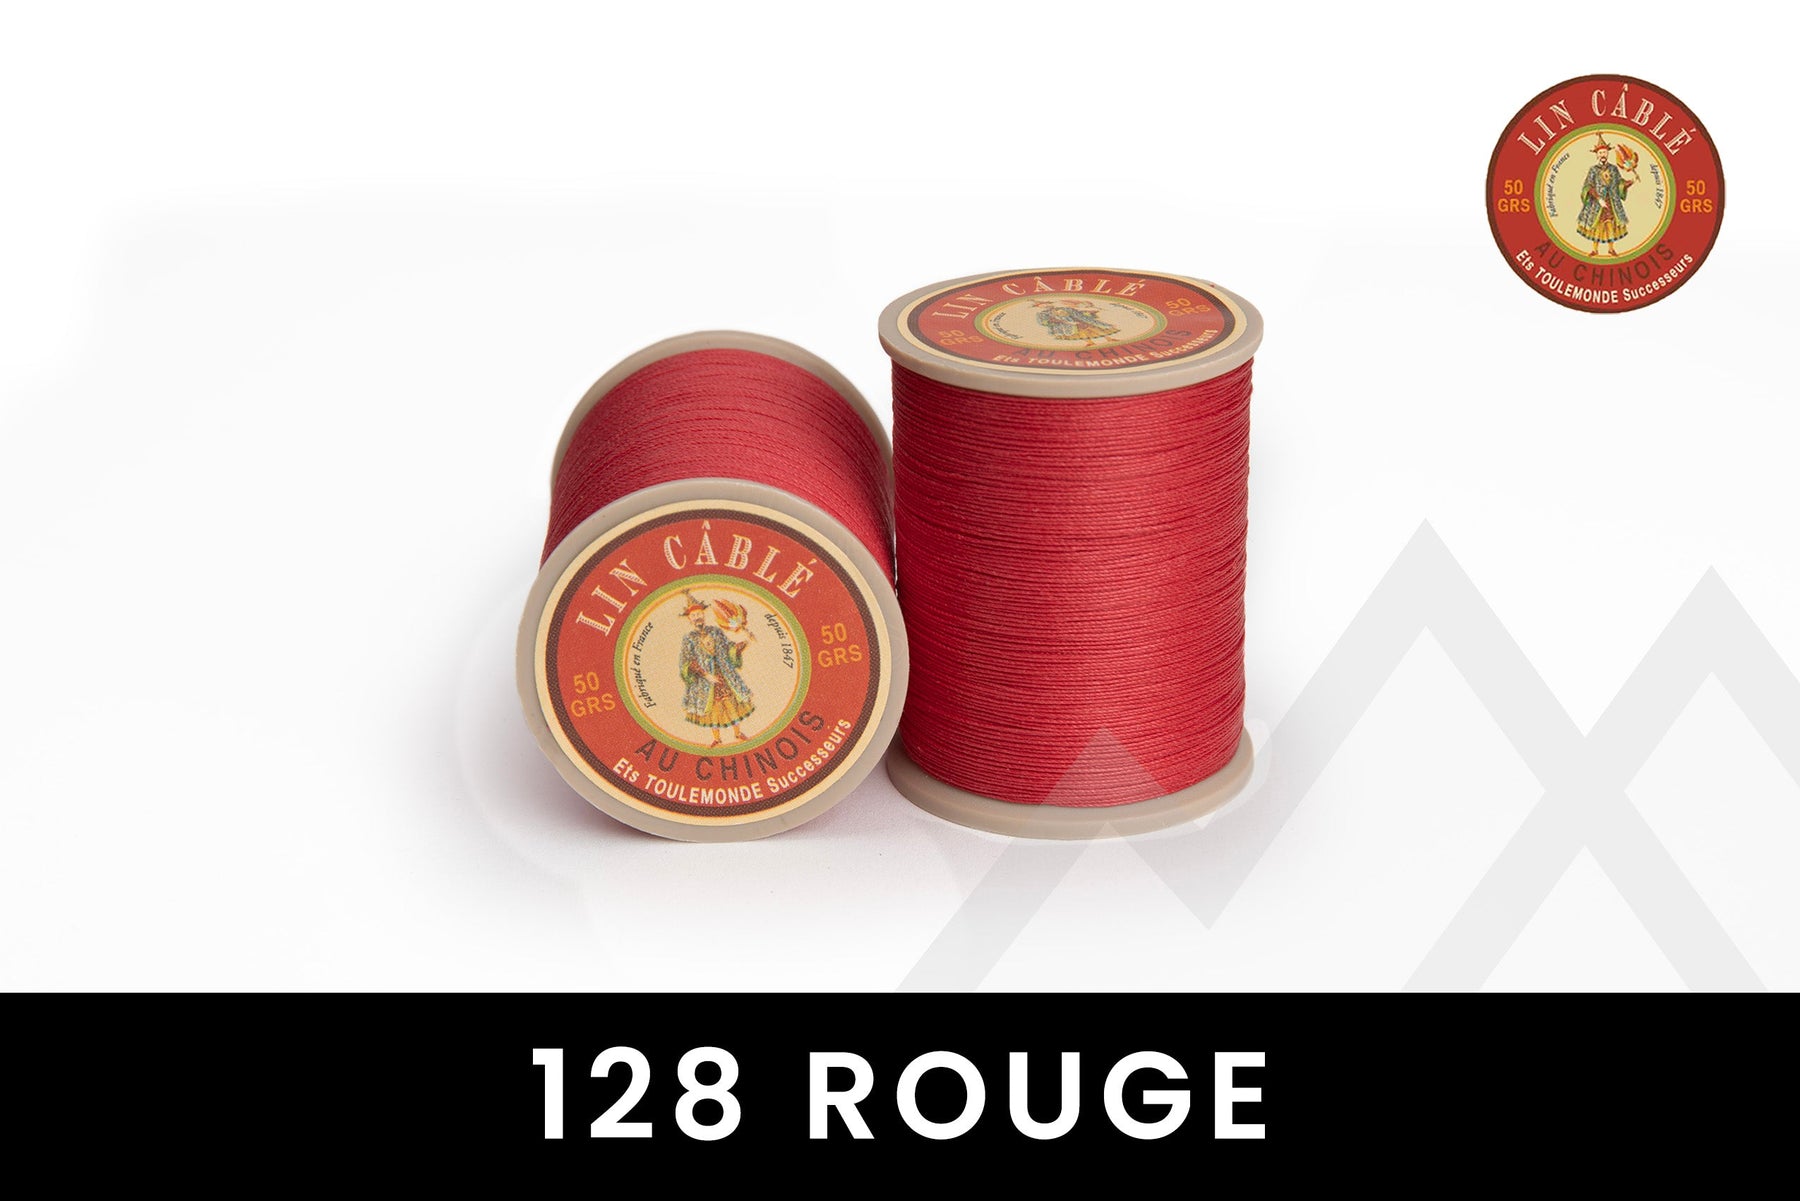 Fil au Chinois 🇫🇷 - "Lin Cable" Waxed Linen Thread (Size 532) *15 Meters